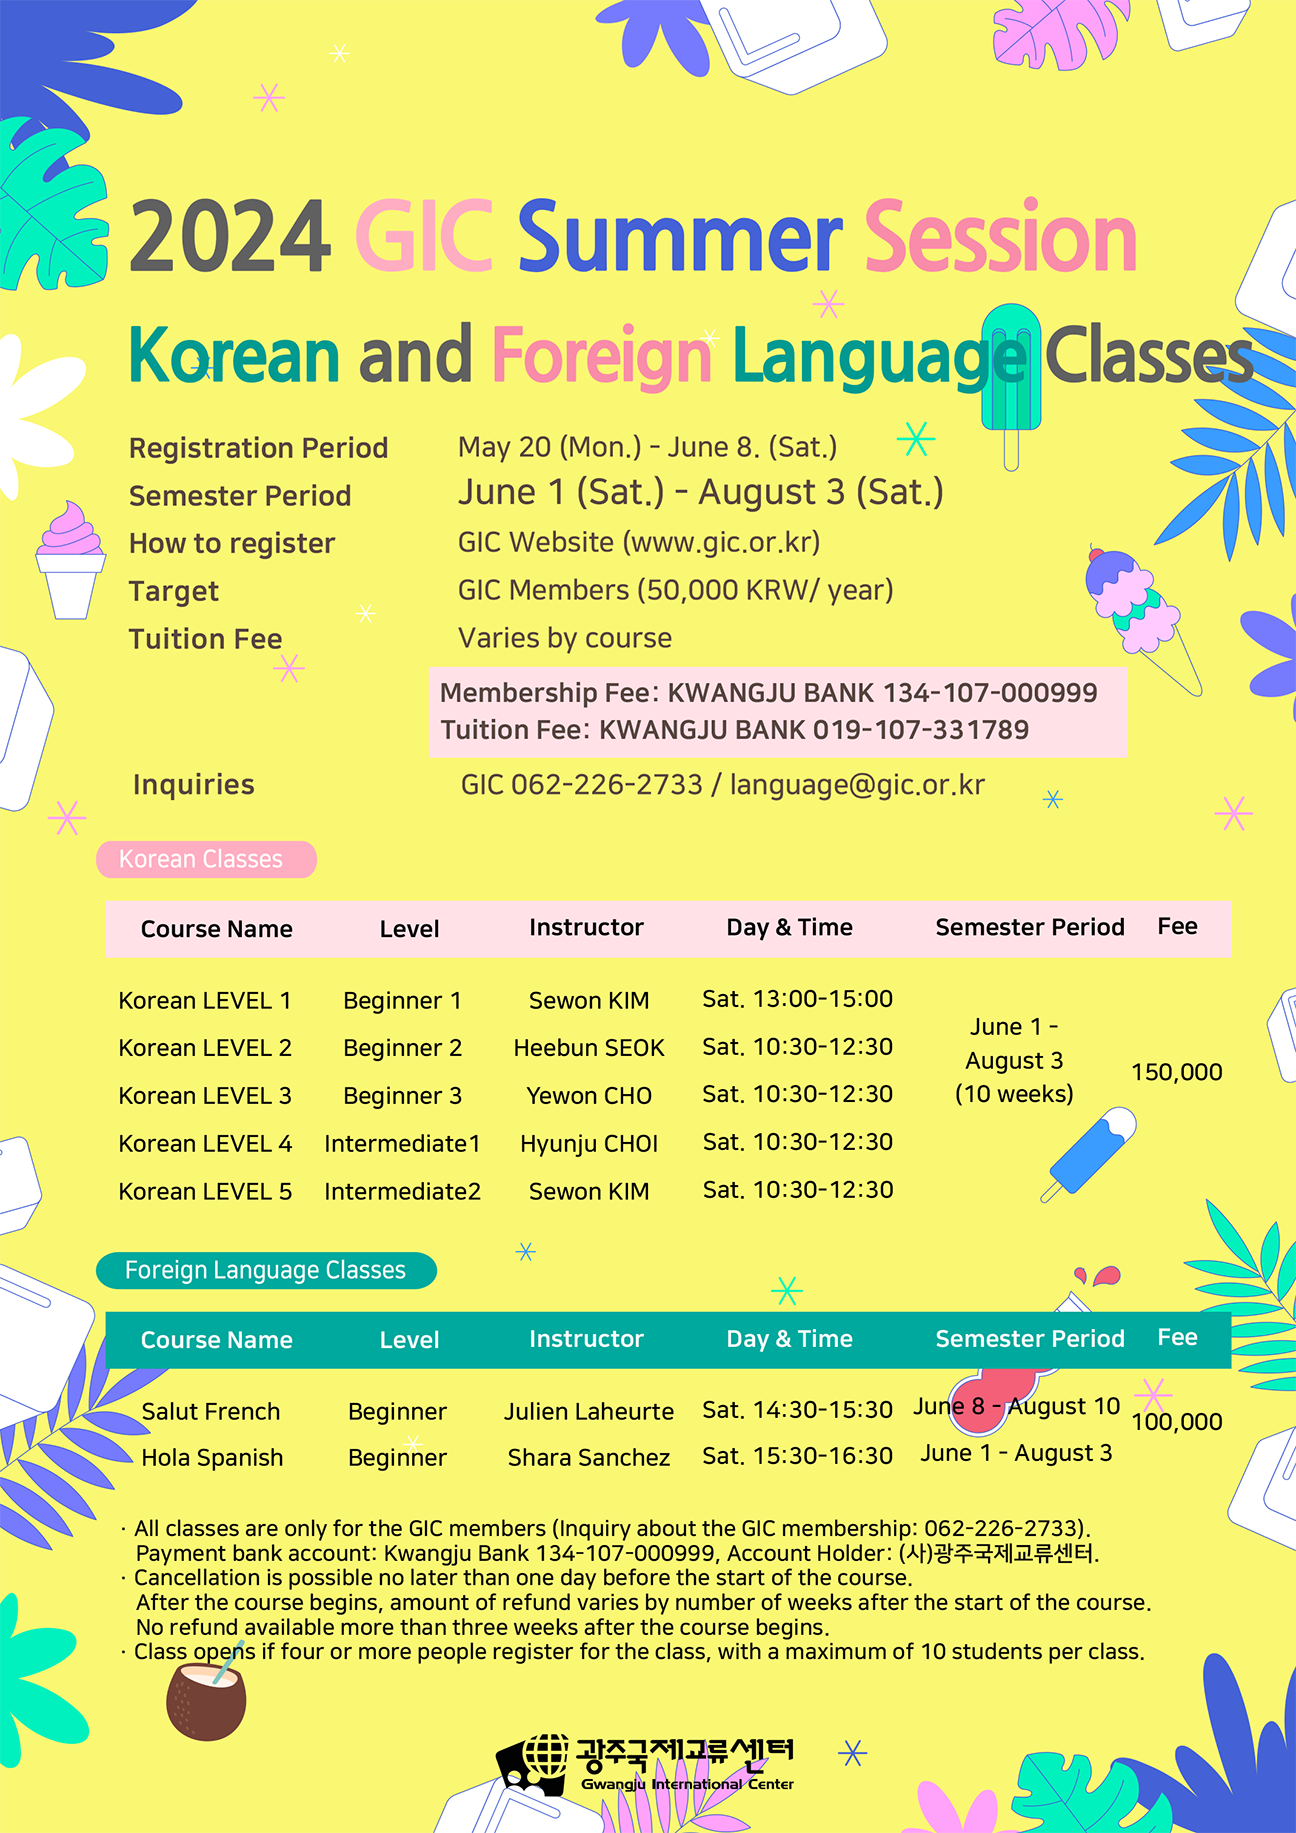 2024 GIC Summer Session - Korean and Foreign Language Classes